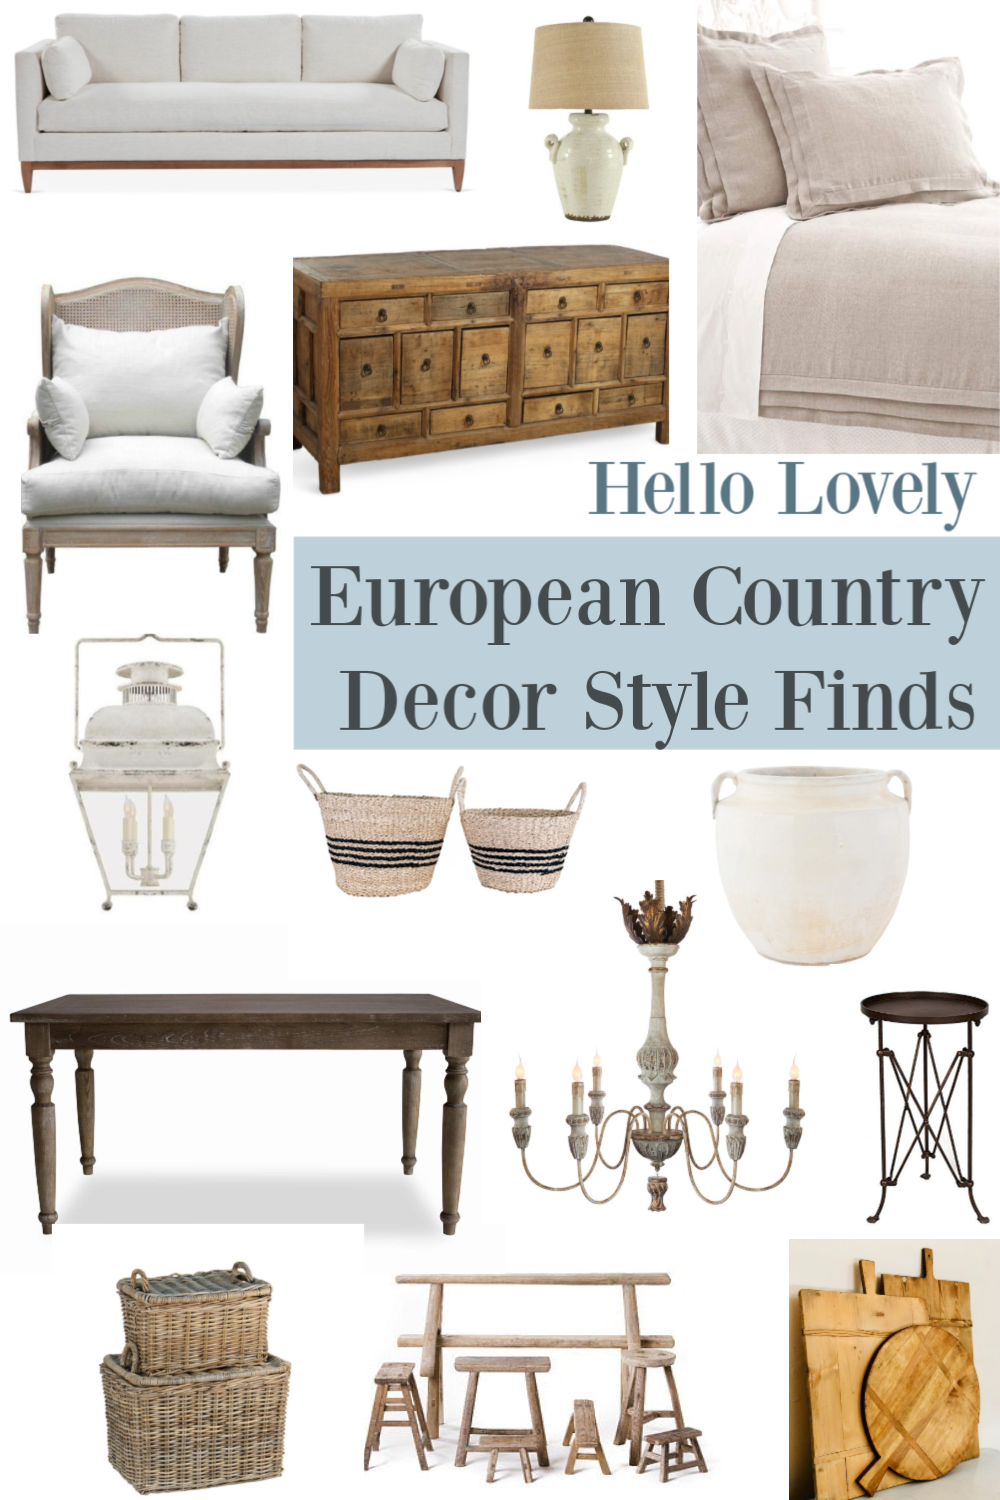 Hello Lovely European Country Decor Style Finds with furniture and home decor resources! #hellolovelystudio #europeancountry #homedecor #furniture #frenchfarmhouse #frenchcountry #interiordesign